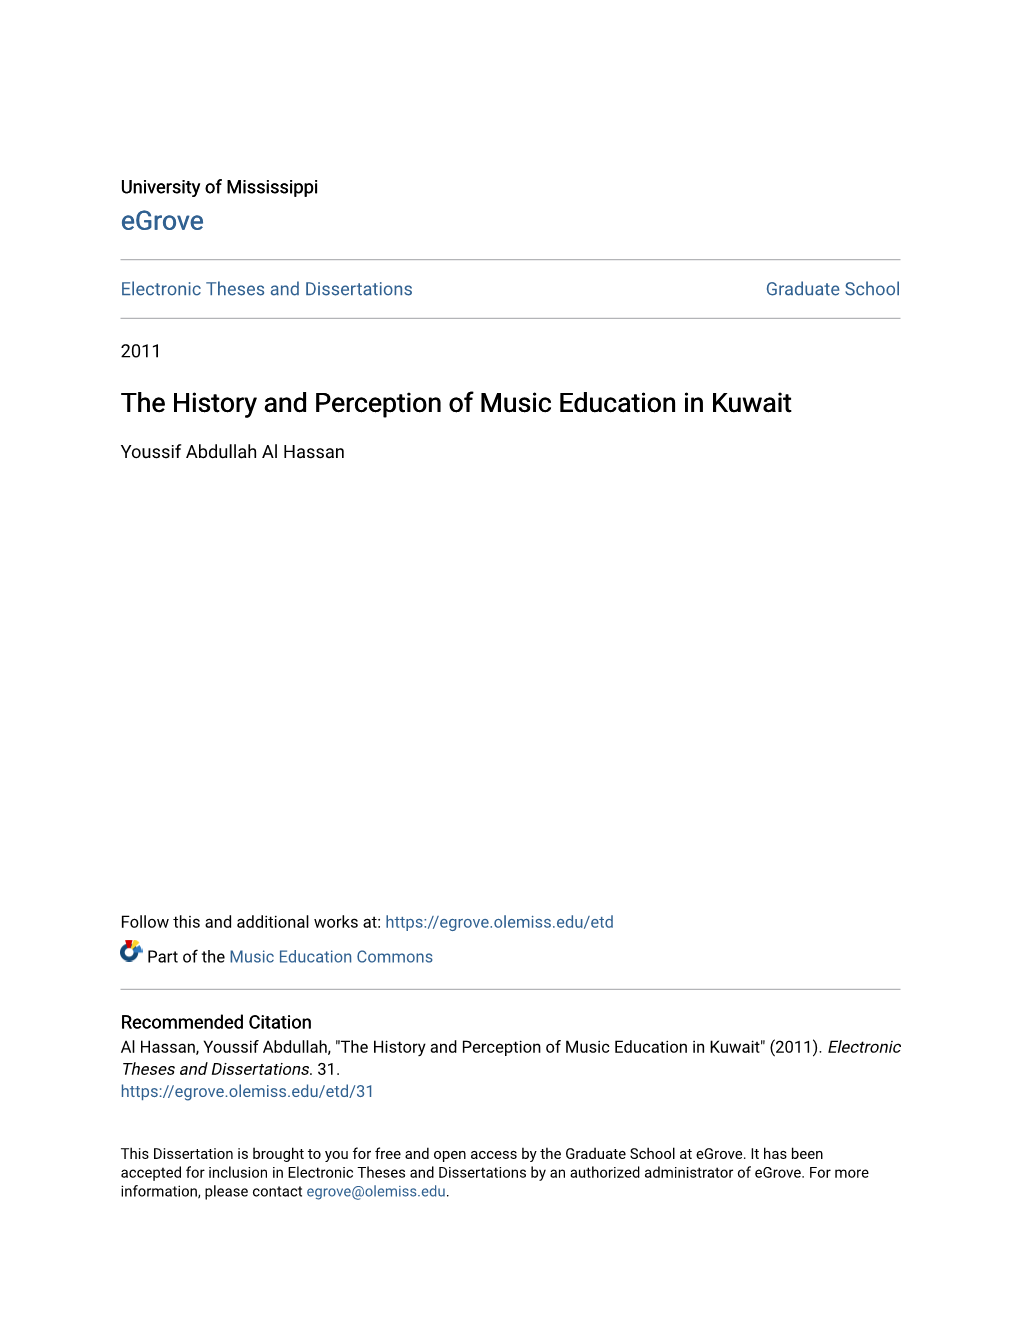 The History and Perception of Music Education in Kuwait